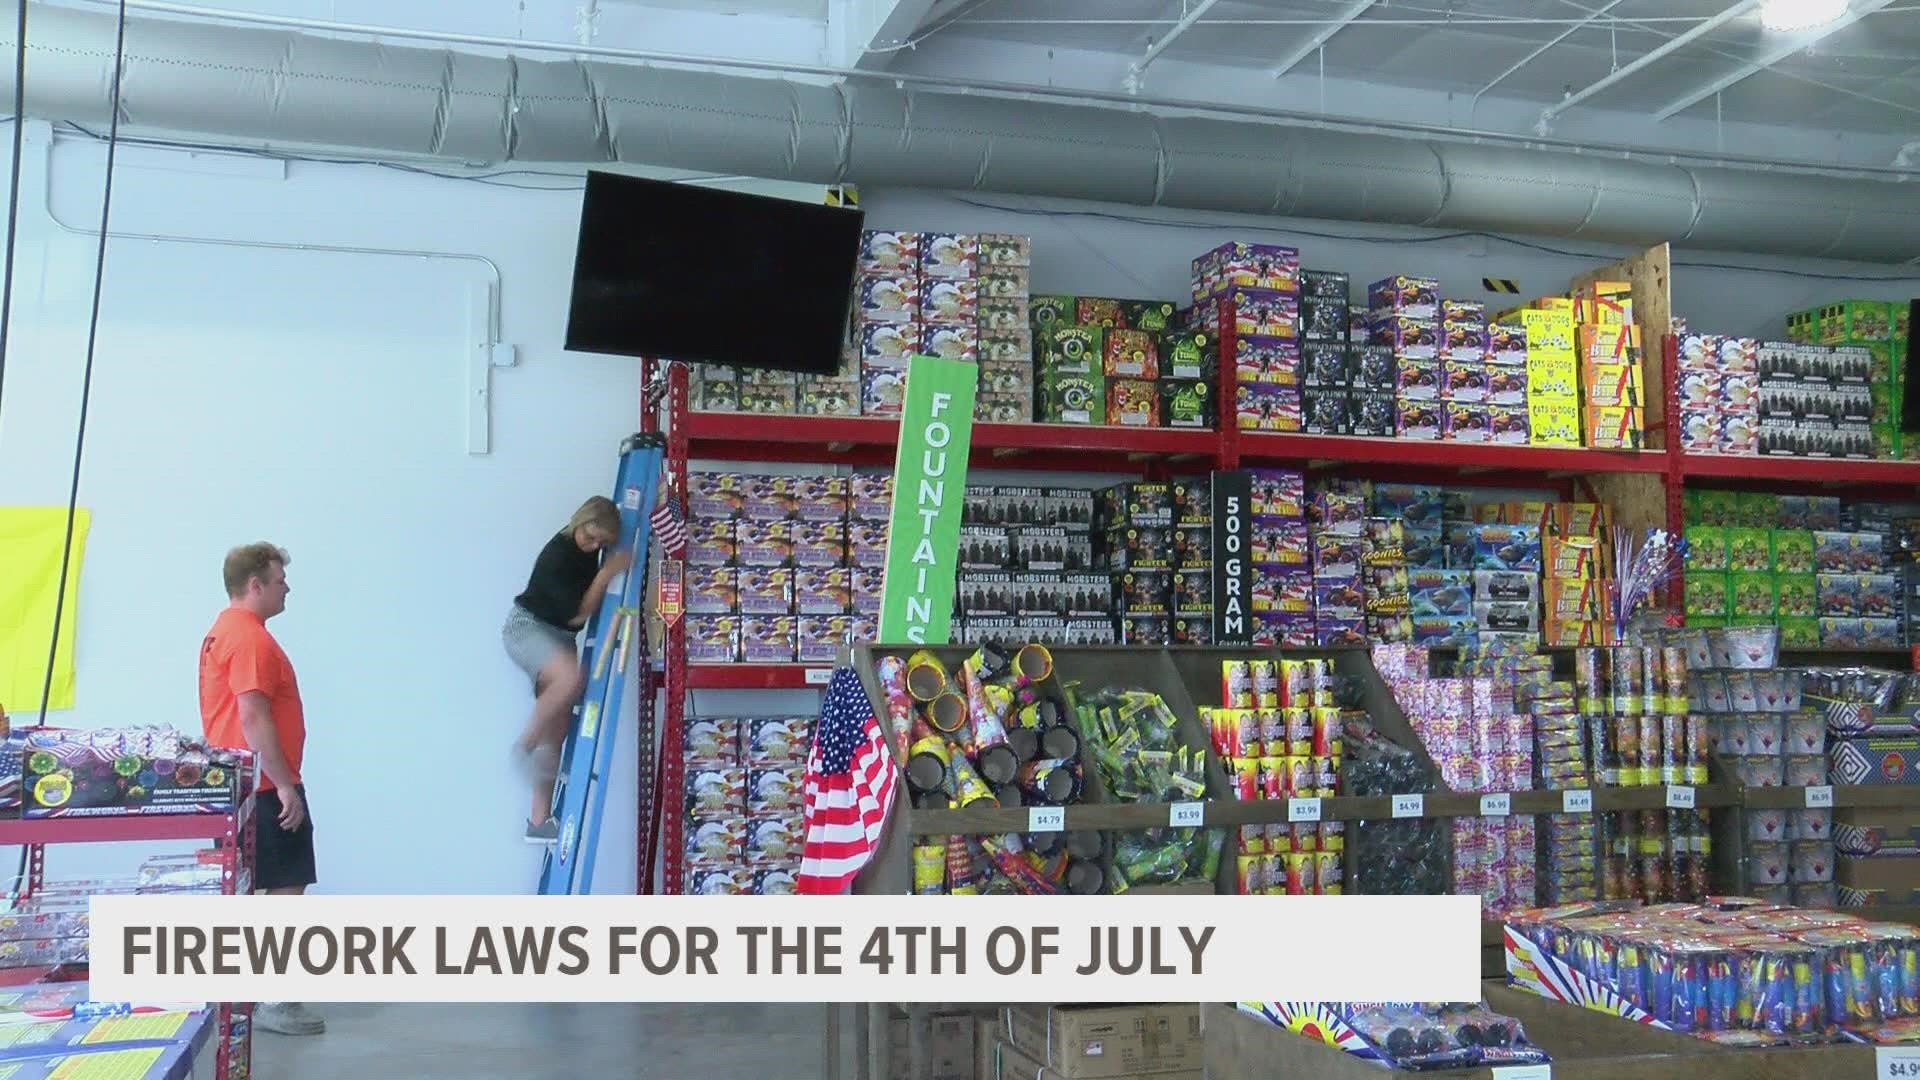 It falls on customers to know what fireworks they are allowed to take home with them, even if stores are more plentiful than ever.